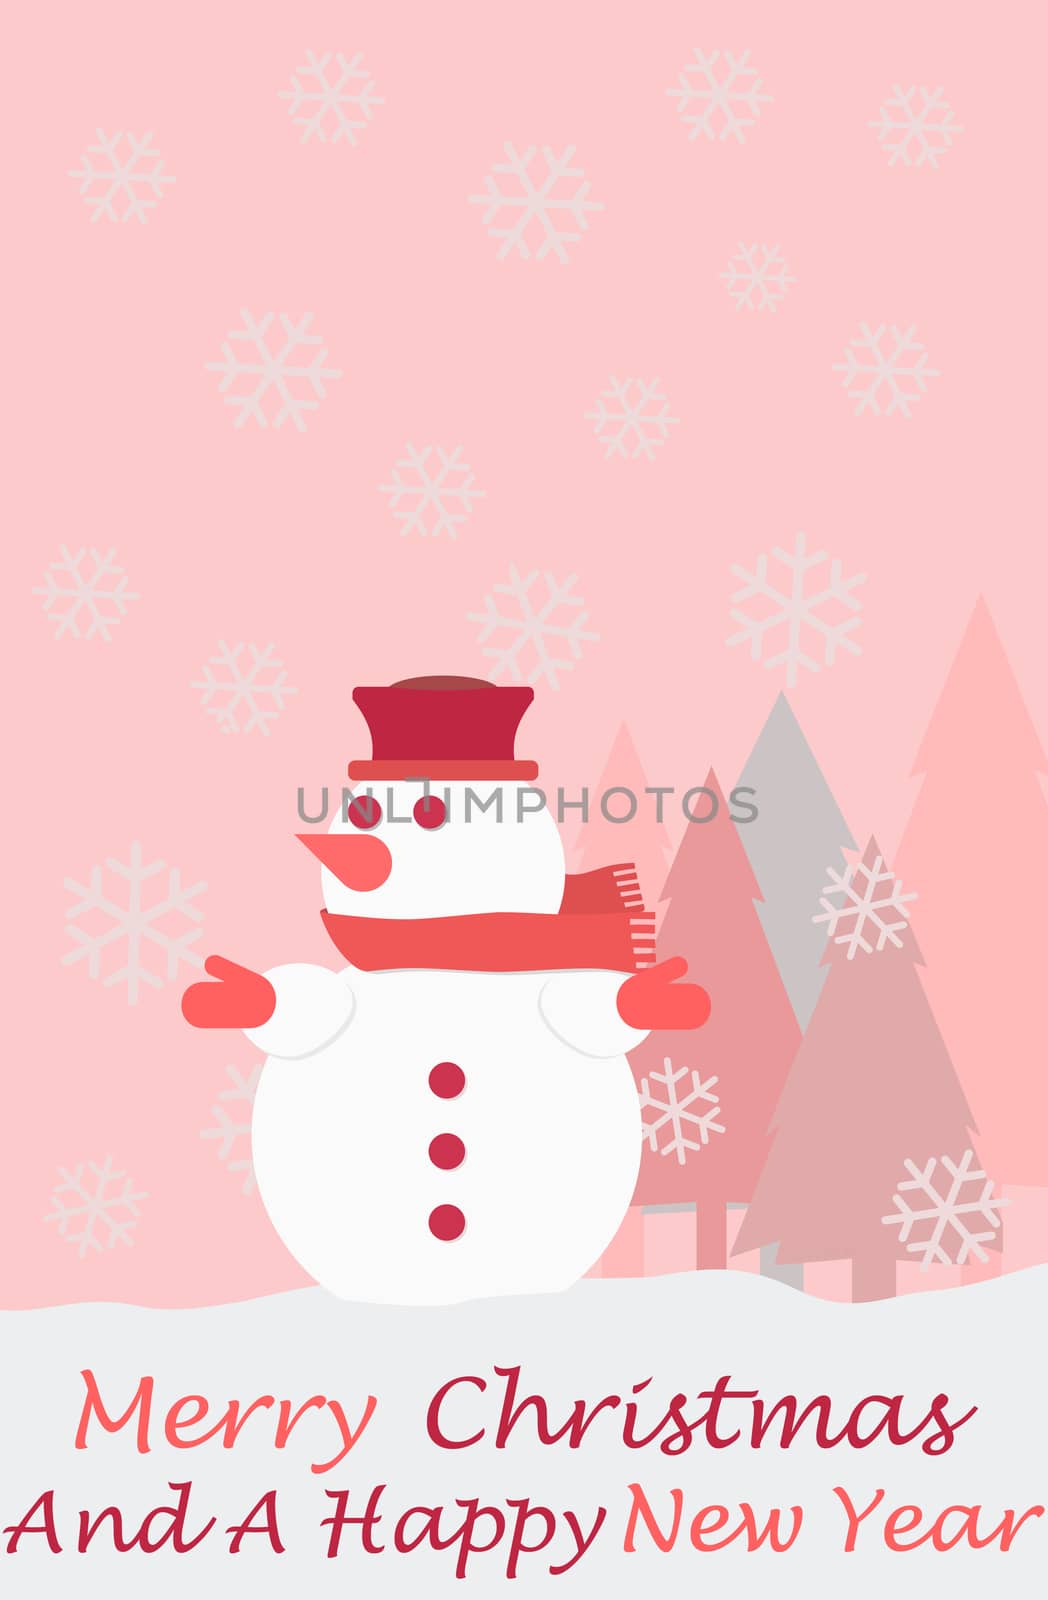 Snowman christmas tree snowflakes and the words Merry Christmas and a happy new year, christmas card